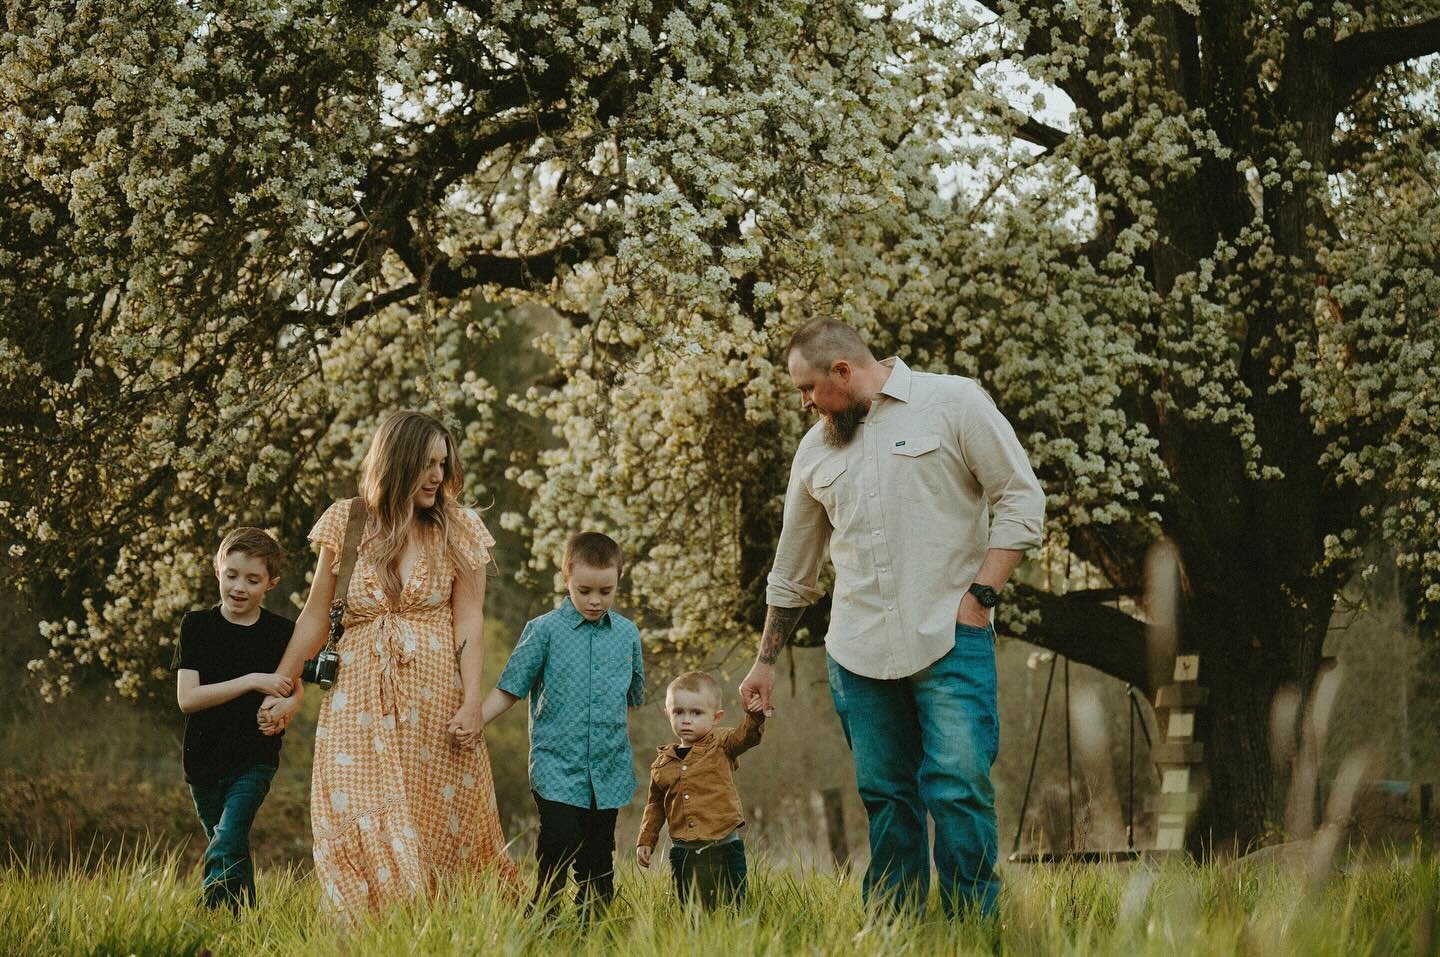 Our tree is blooming and it&rsquo;s some of my favorite photos I get to capture each year. If you are interested in booking a session in the field with our blooming beauty I&rsquo;m offering $100 off. It would need to be done within the next week/wee